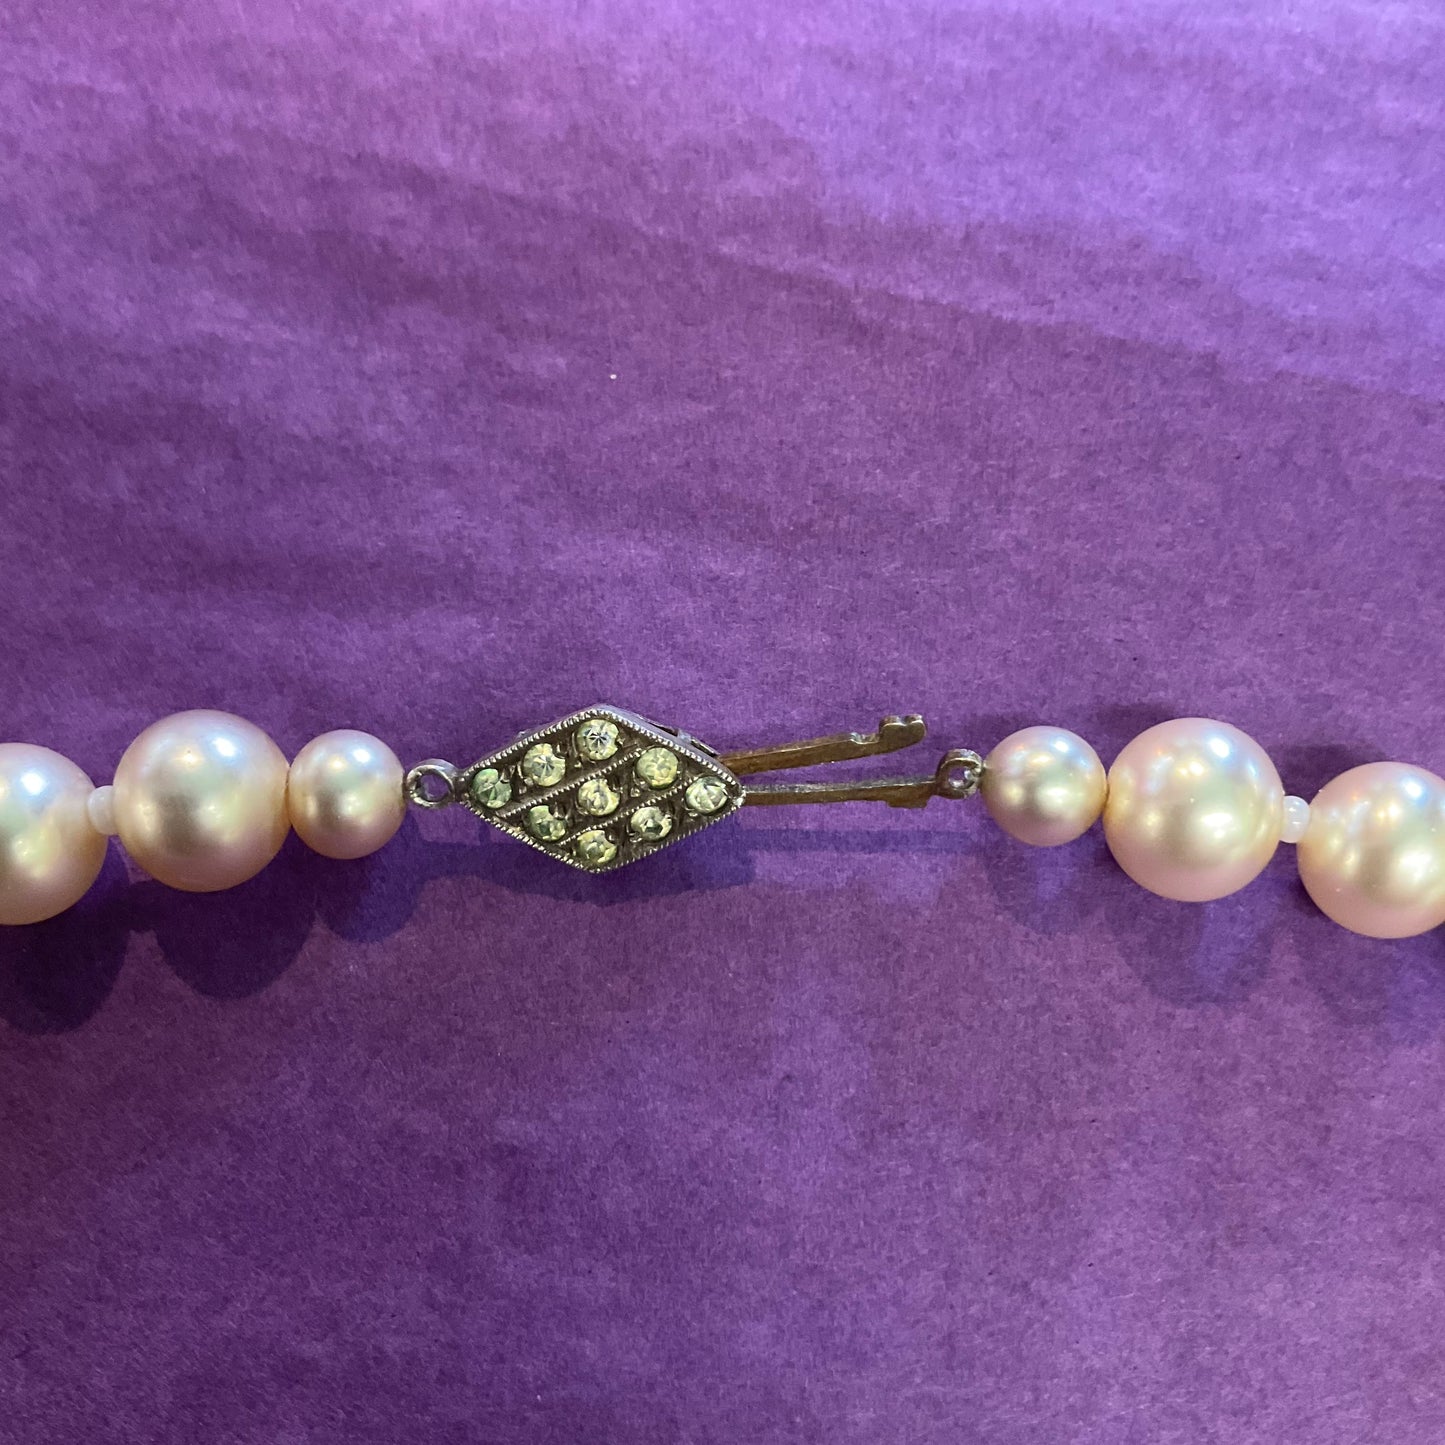 Vintage 1950s faux pearl necklace with silver clasp